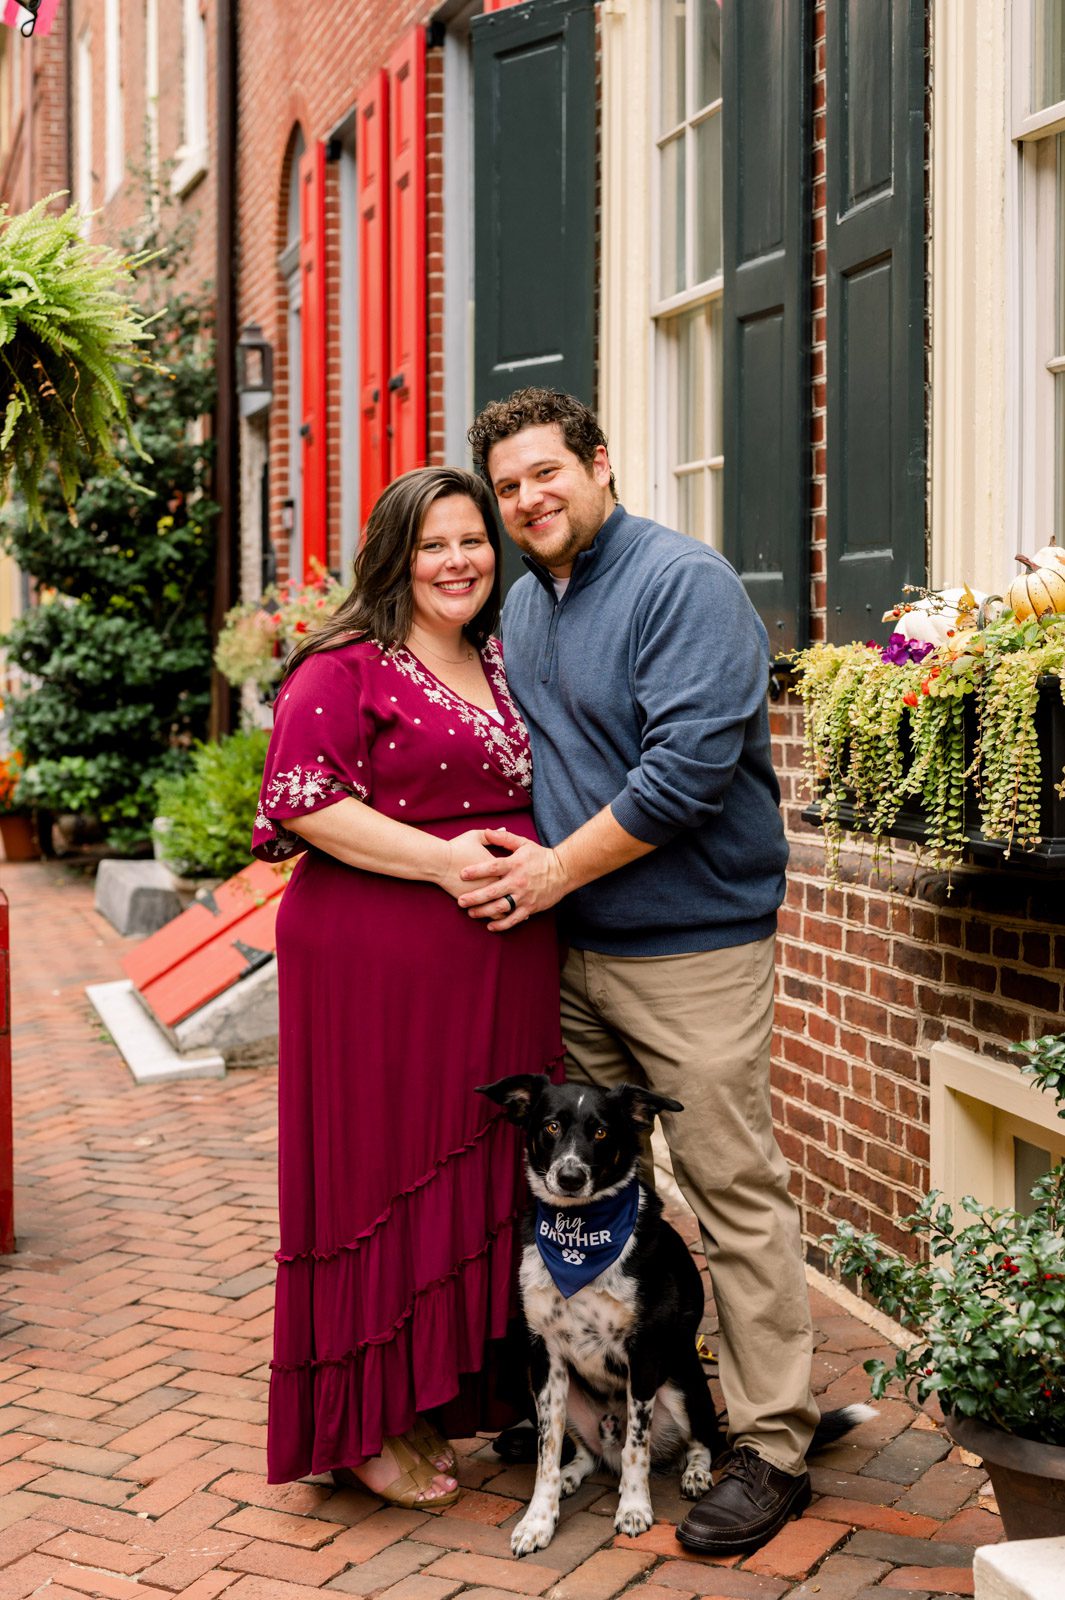 expecting parents and their pet dog standing in Elfreth's Alley and smiling at the camera during a Philadelphia maternity photoshoot